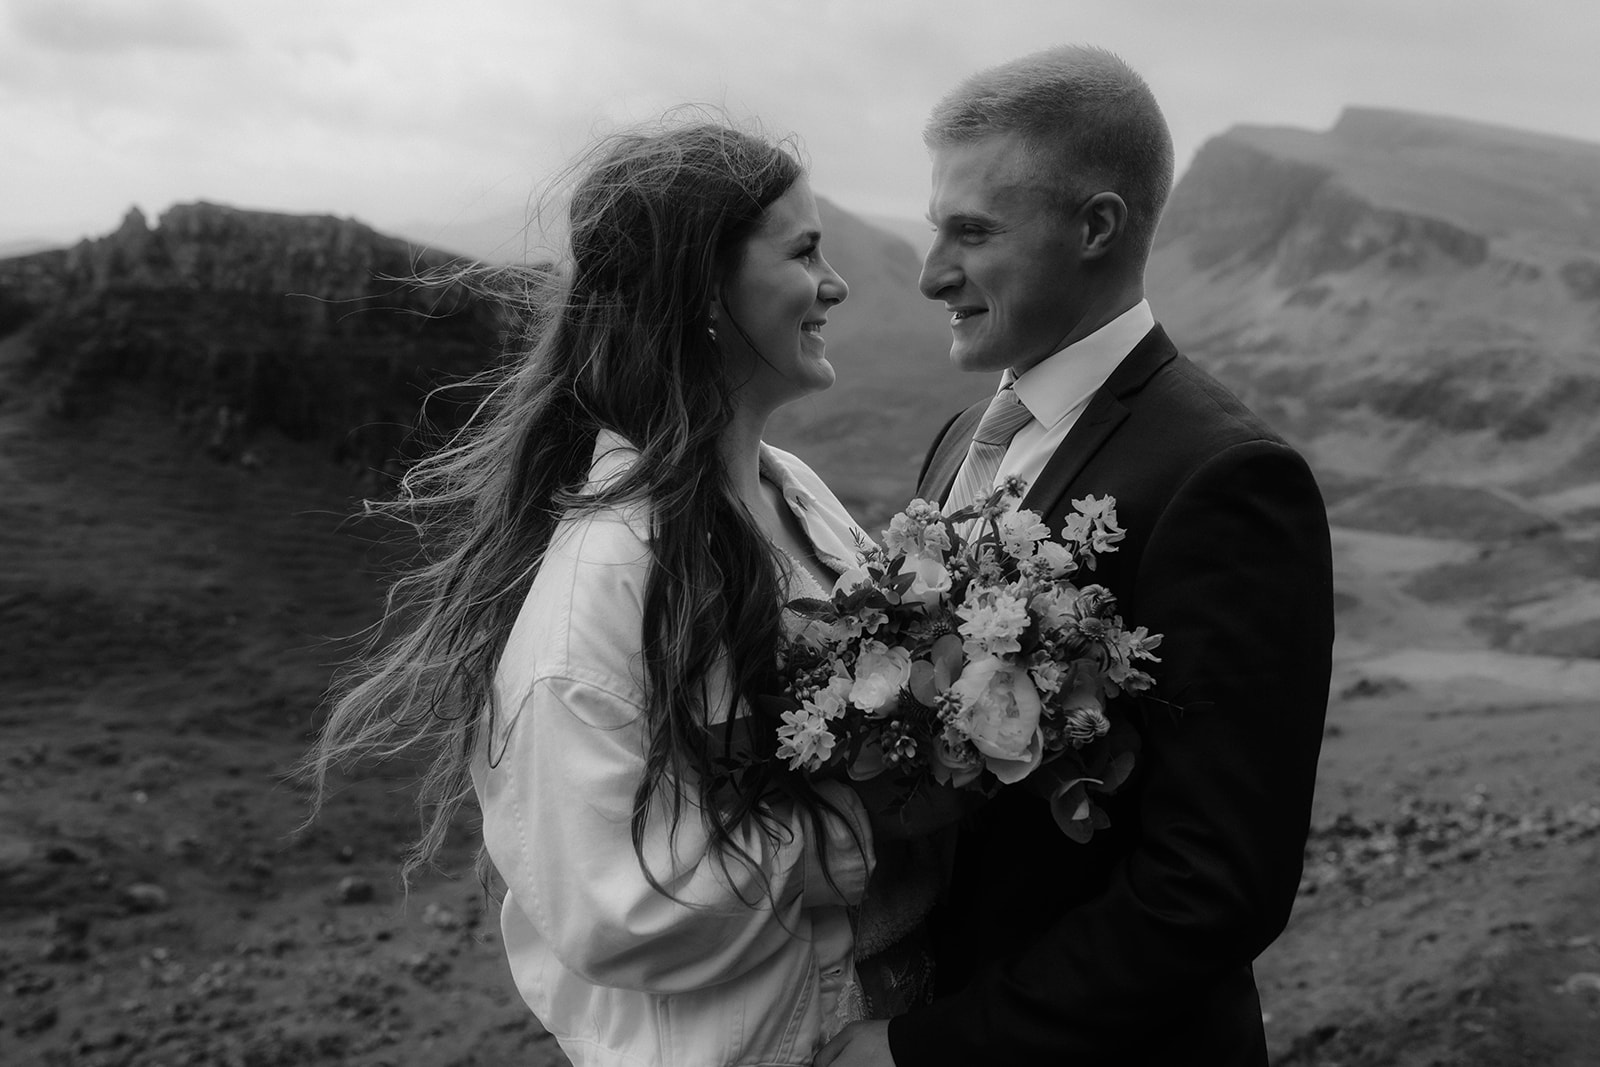 Elopement couples Emma and Matthew looking lovingly at each other on the Isle of Skye.